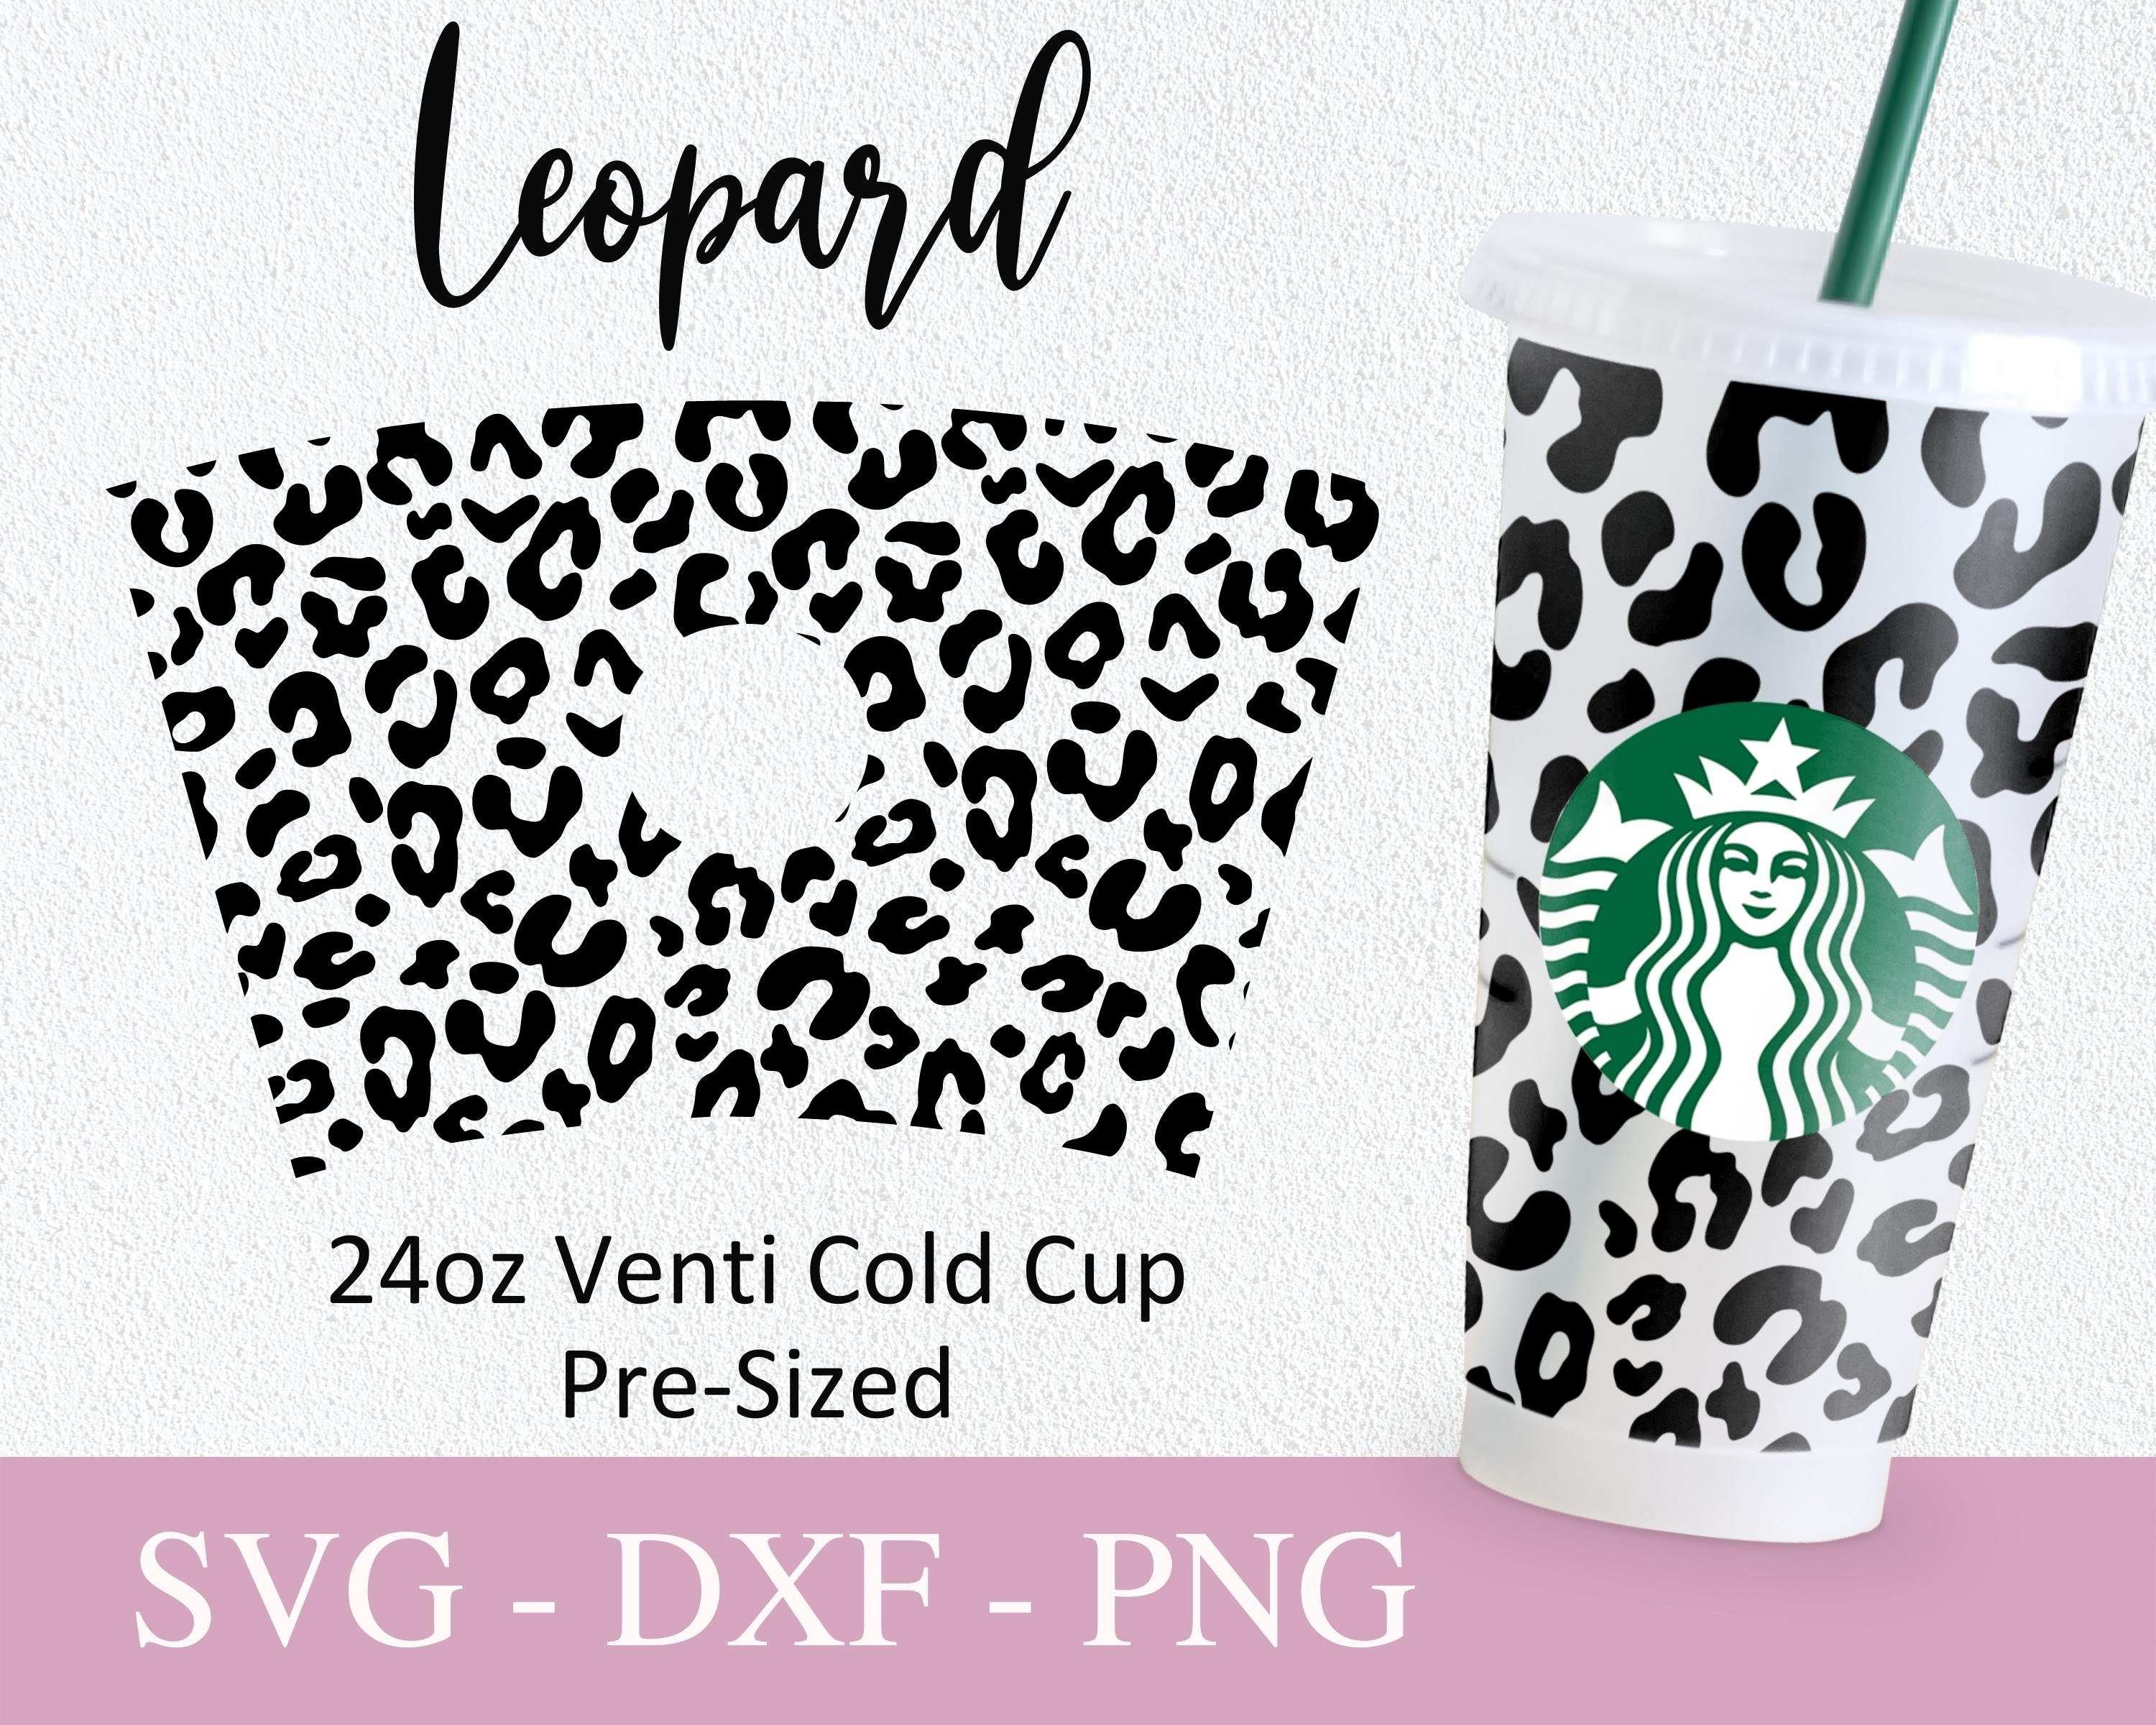 Blue Cheetah Print Starbucks Cup – Ally's Finds